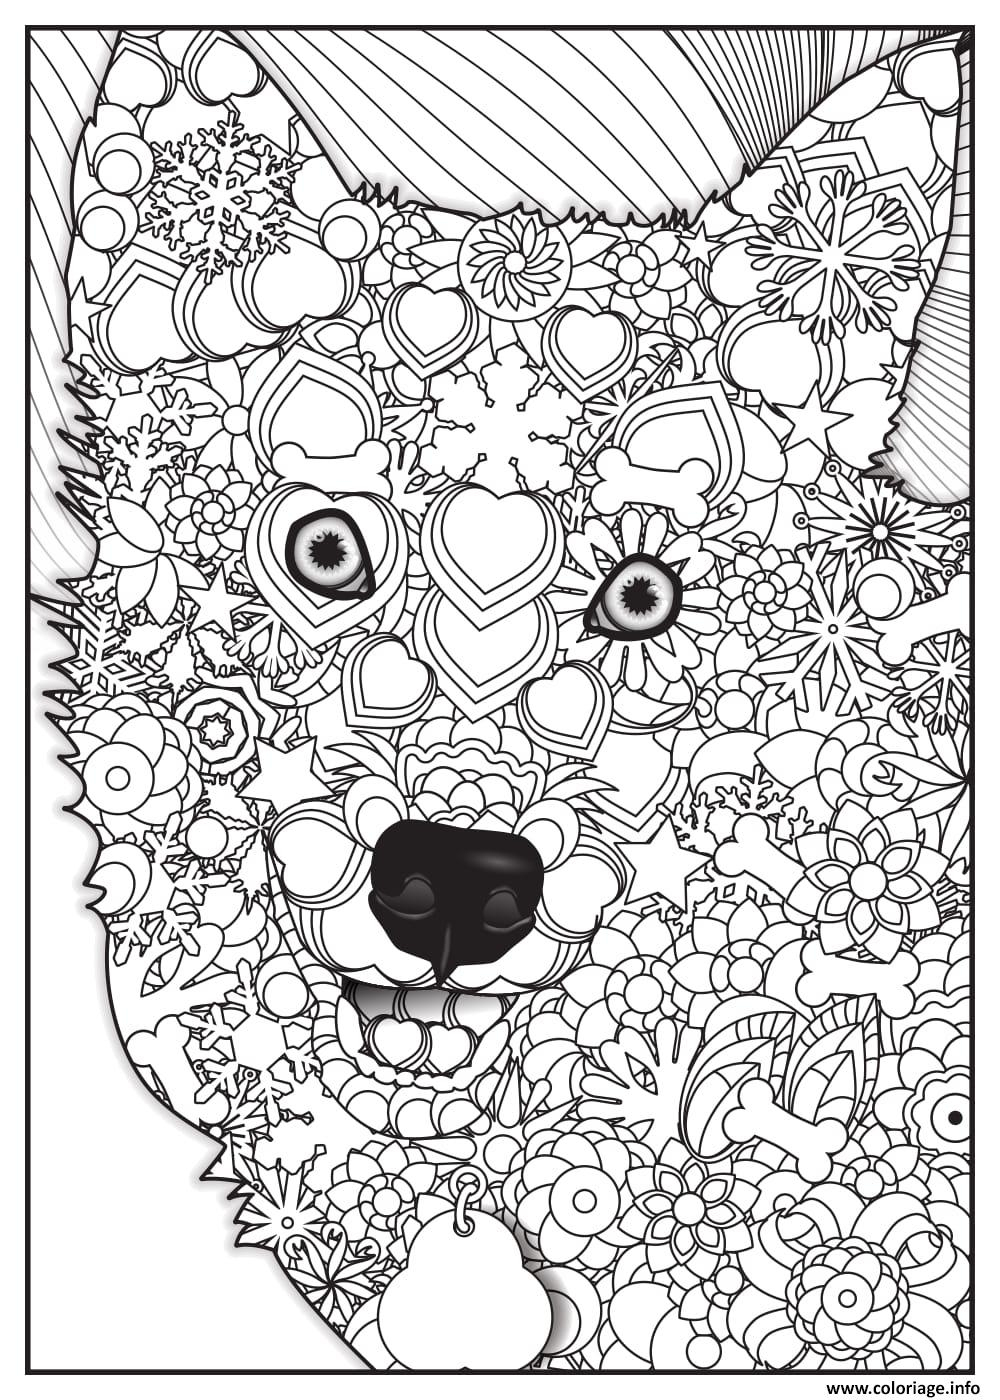 Coloriage Loup Wolf Adulte Animaux Dessin Adulte Animaux À Imprimer concernant Coloriage Loup Imprimer